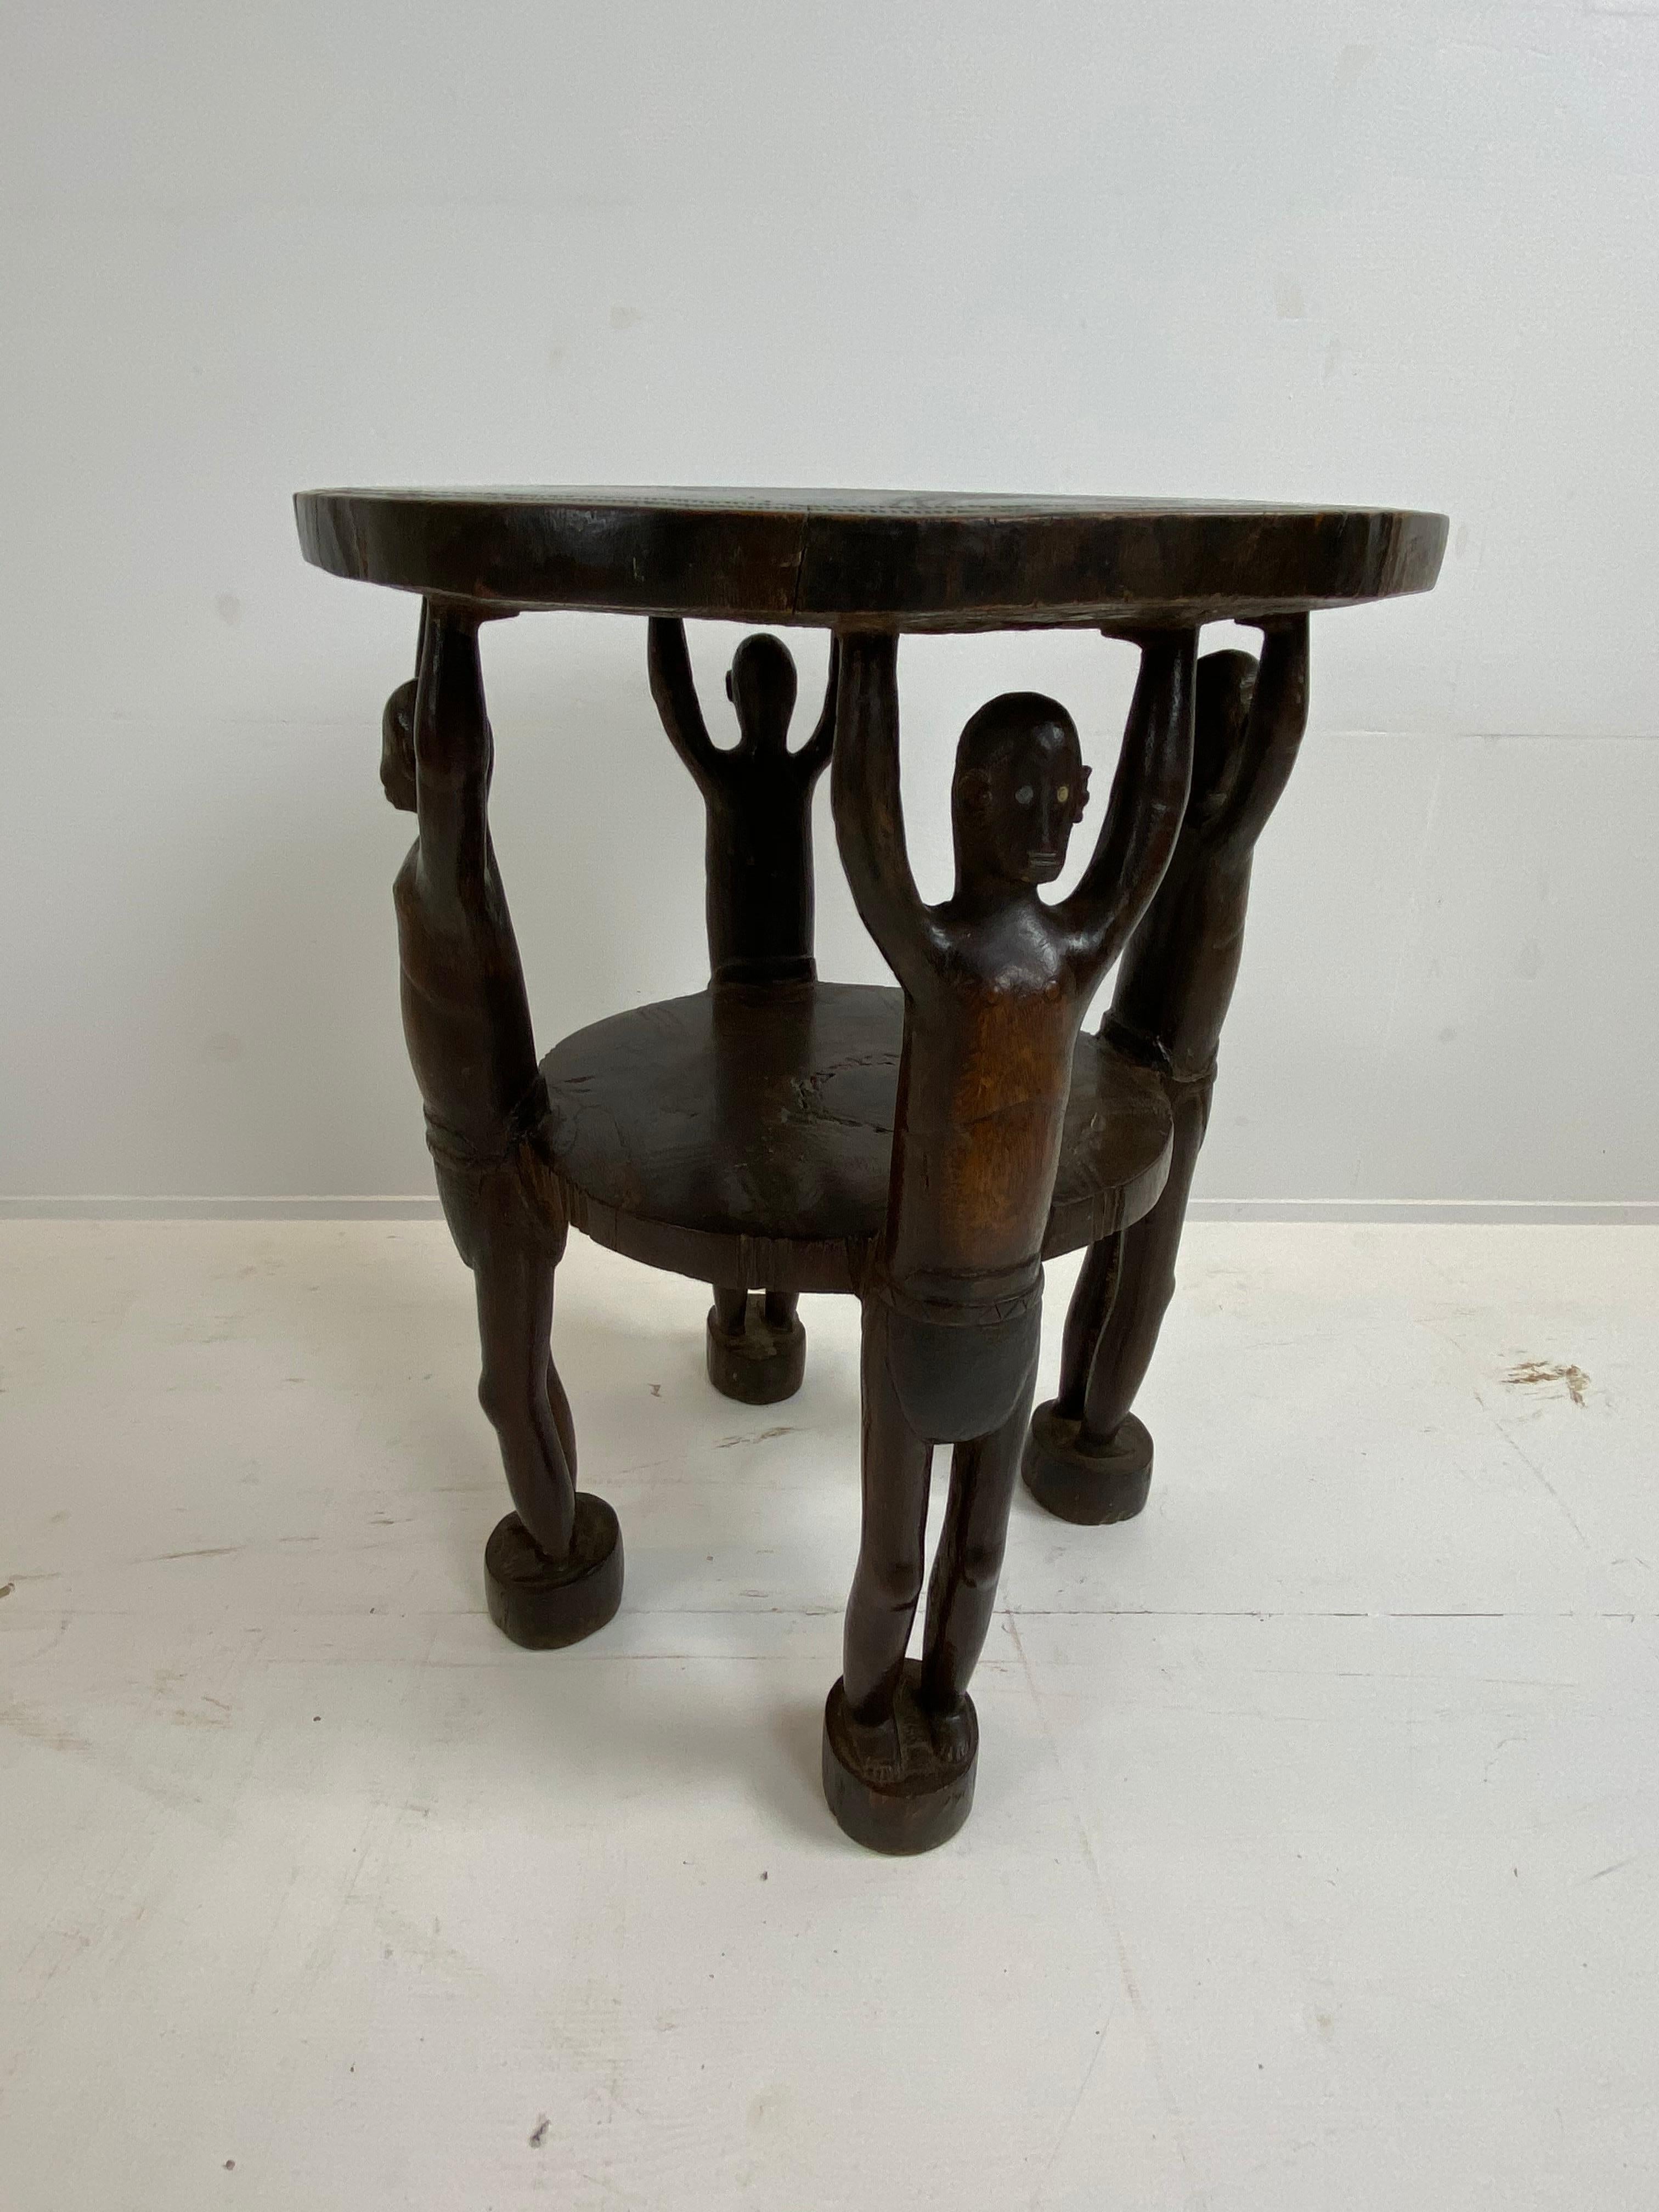 African stool with a great patina,
Decorated with African Tribal Figures,
Good great old patina of the wood,warm finish and glanze,
Dates from around 1960,collected in Congo from a Belgian Private Collection.